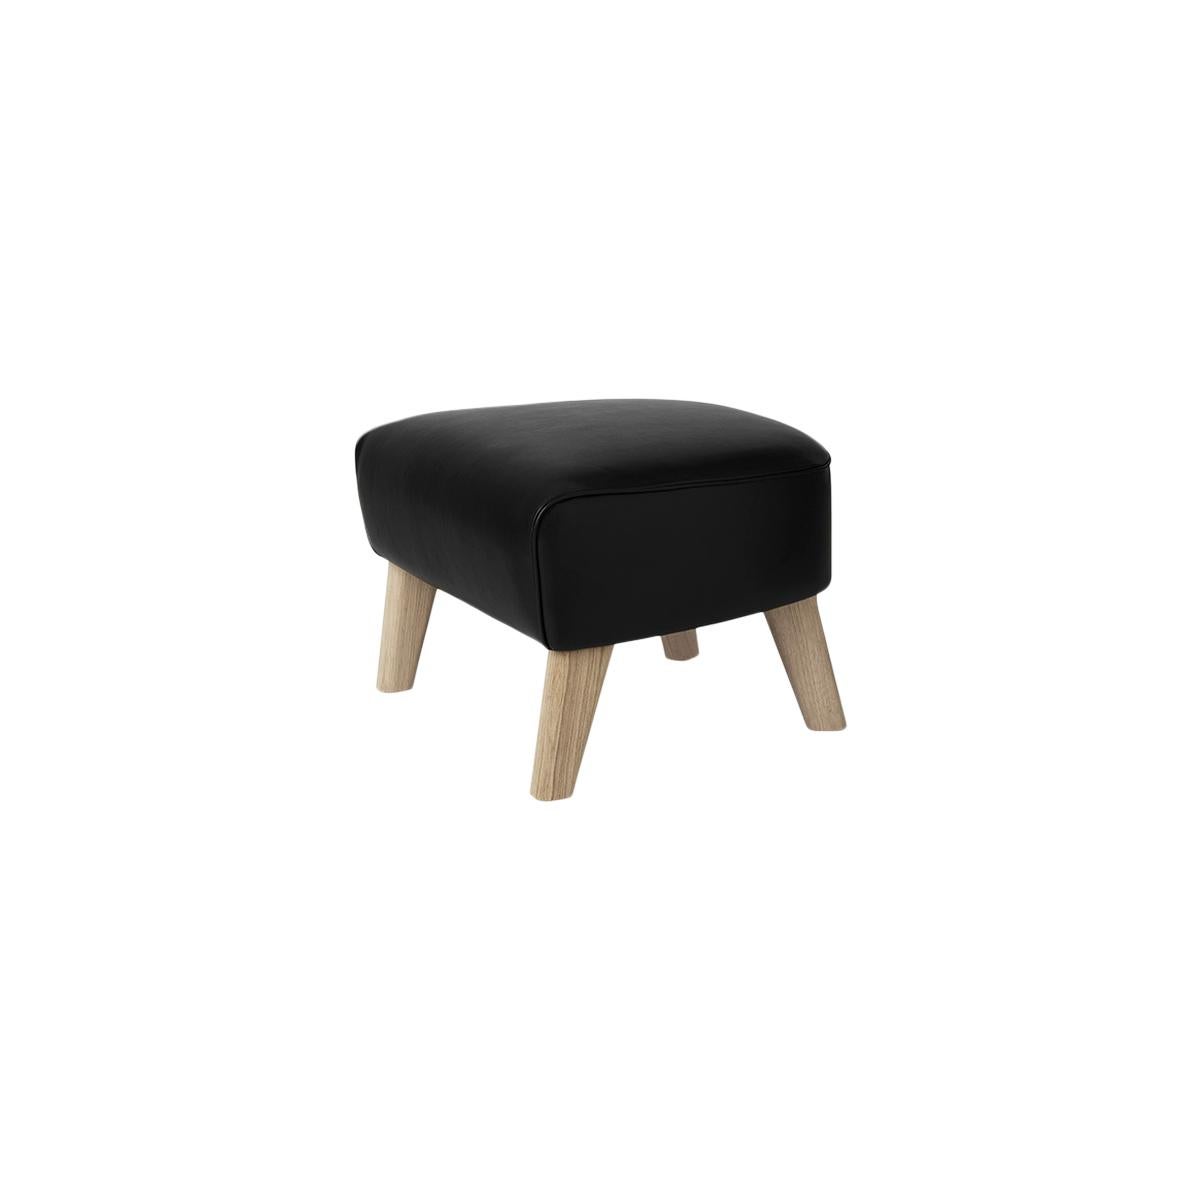 Black leather and natural oak my own chair footstool by Lassen
Dimensions: W 56 x D 58 x H 40 cm 
Materials: Leather

The my own chair footstool has been designed in the same spirit as Flemming Lassen’s original iconic chair, reflecting his love